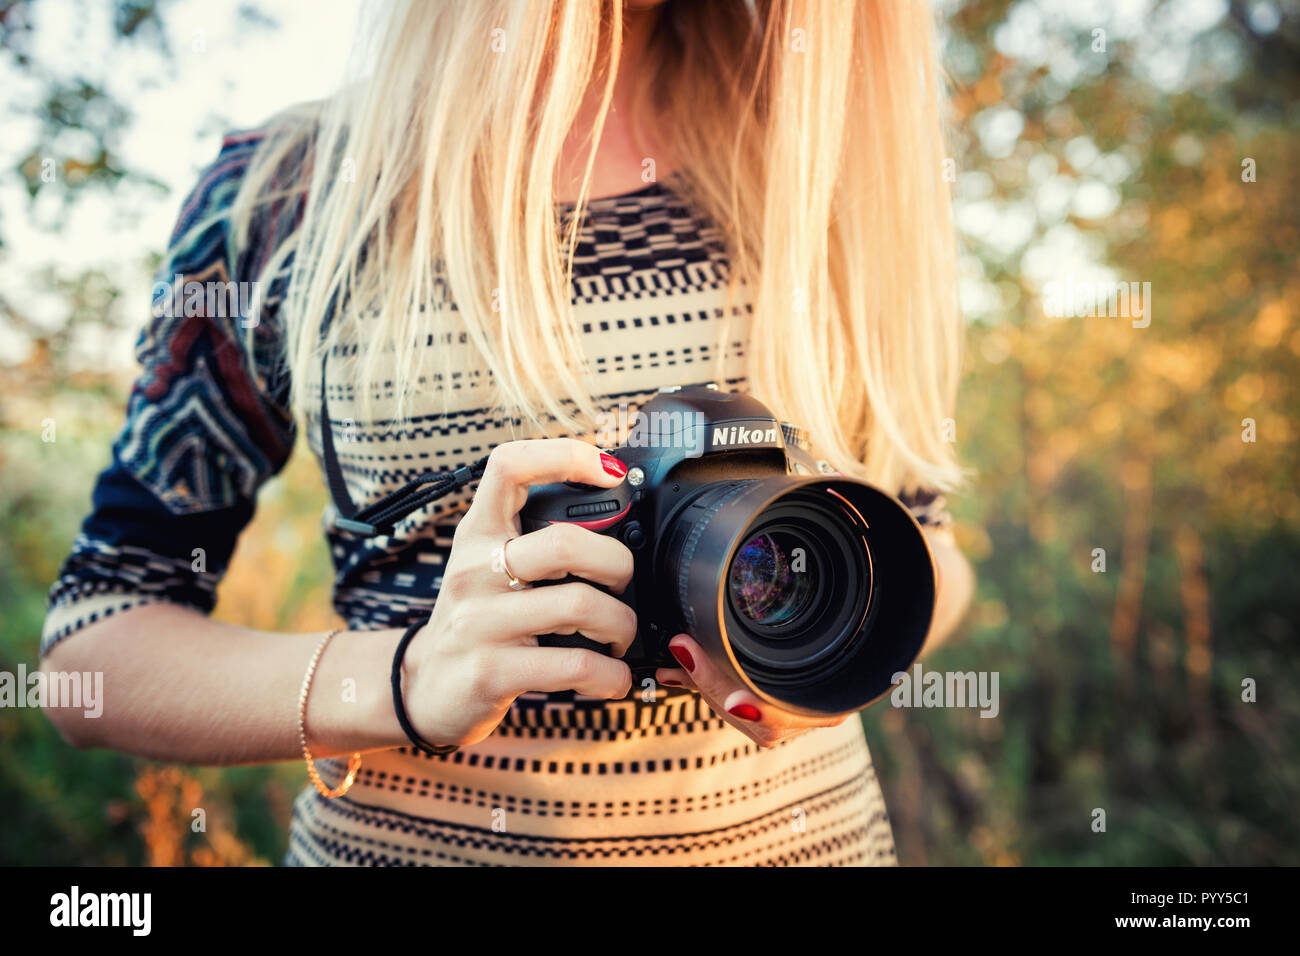 Moscow, Russia - October 4, 2014: Girl photographer holds Nikon D610 camera and Nikkor 50mm f/1.4G lens Stock Photo